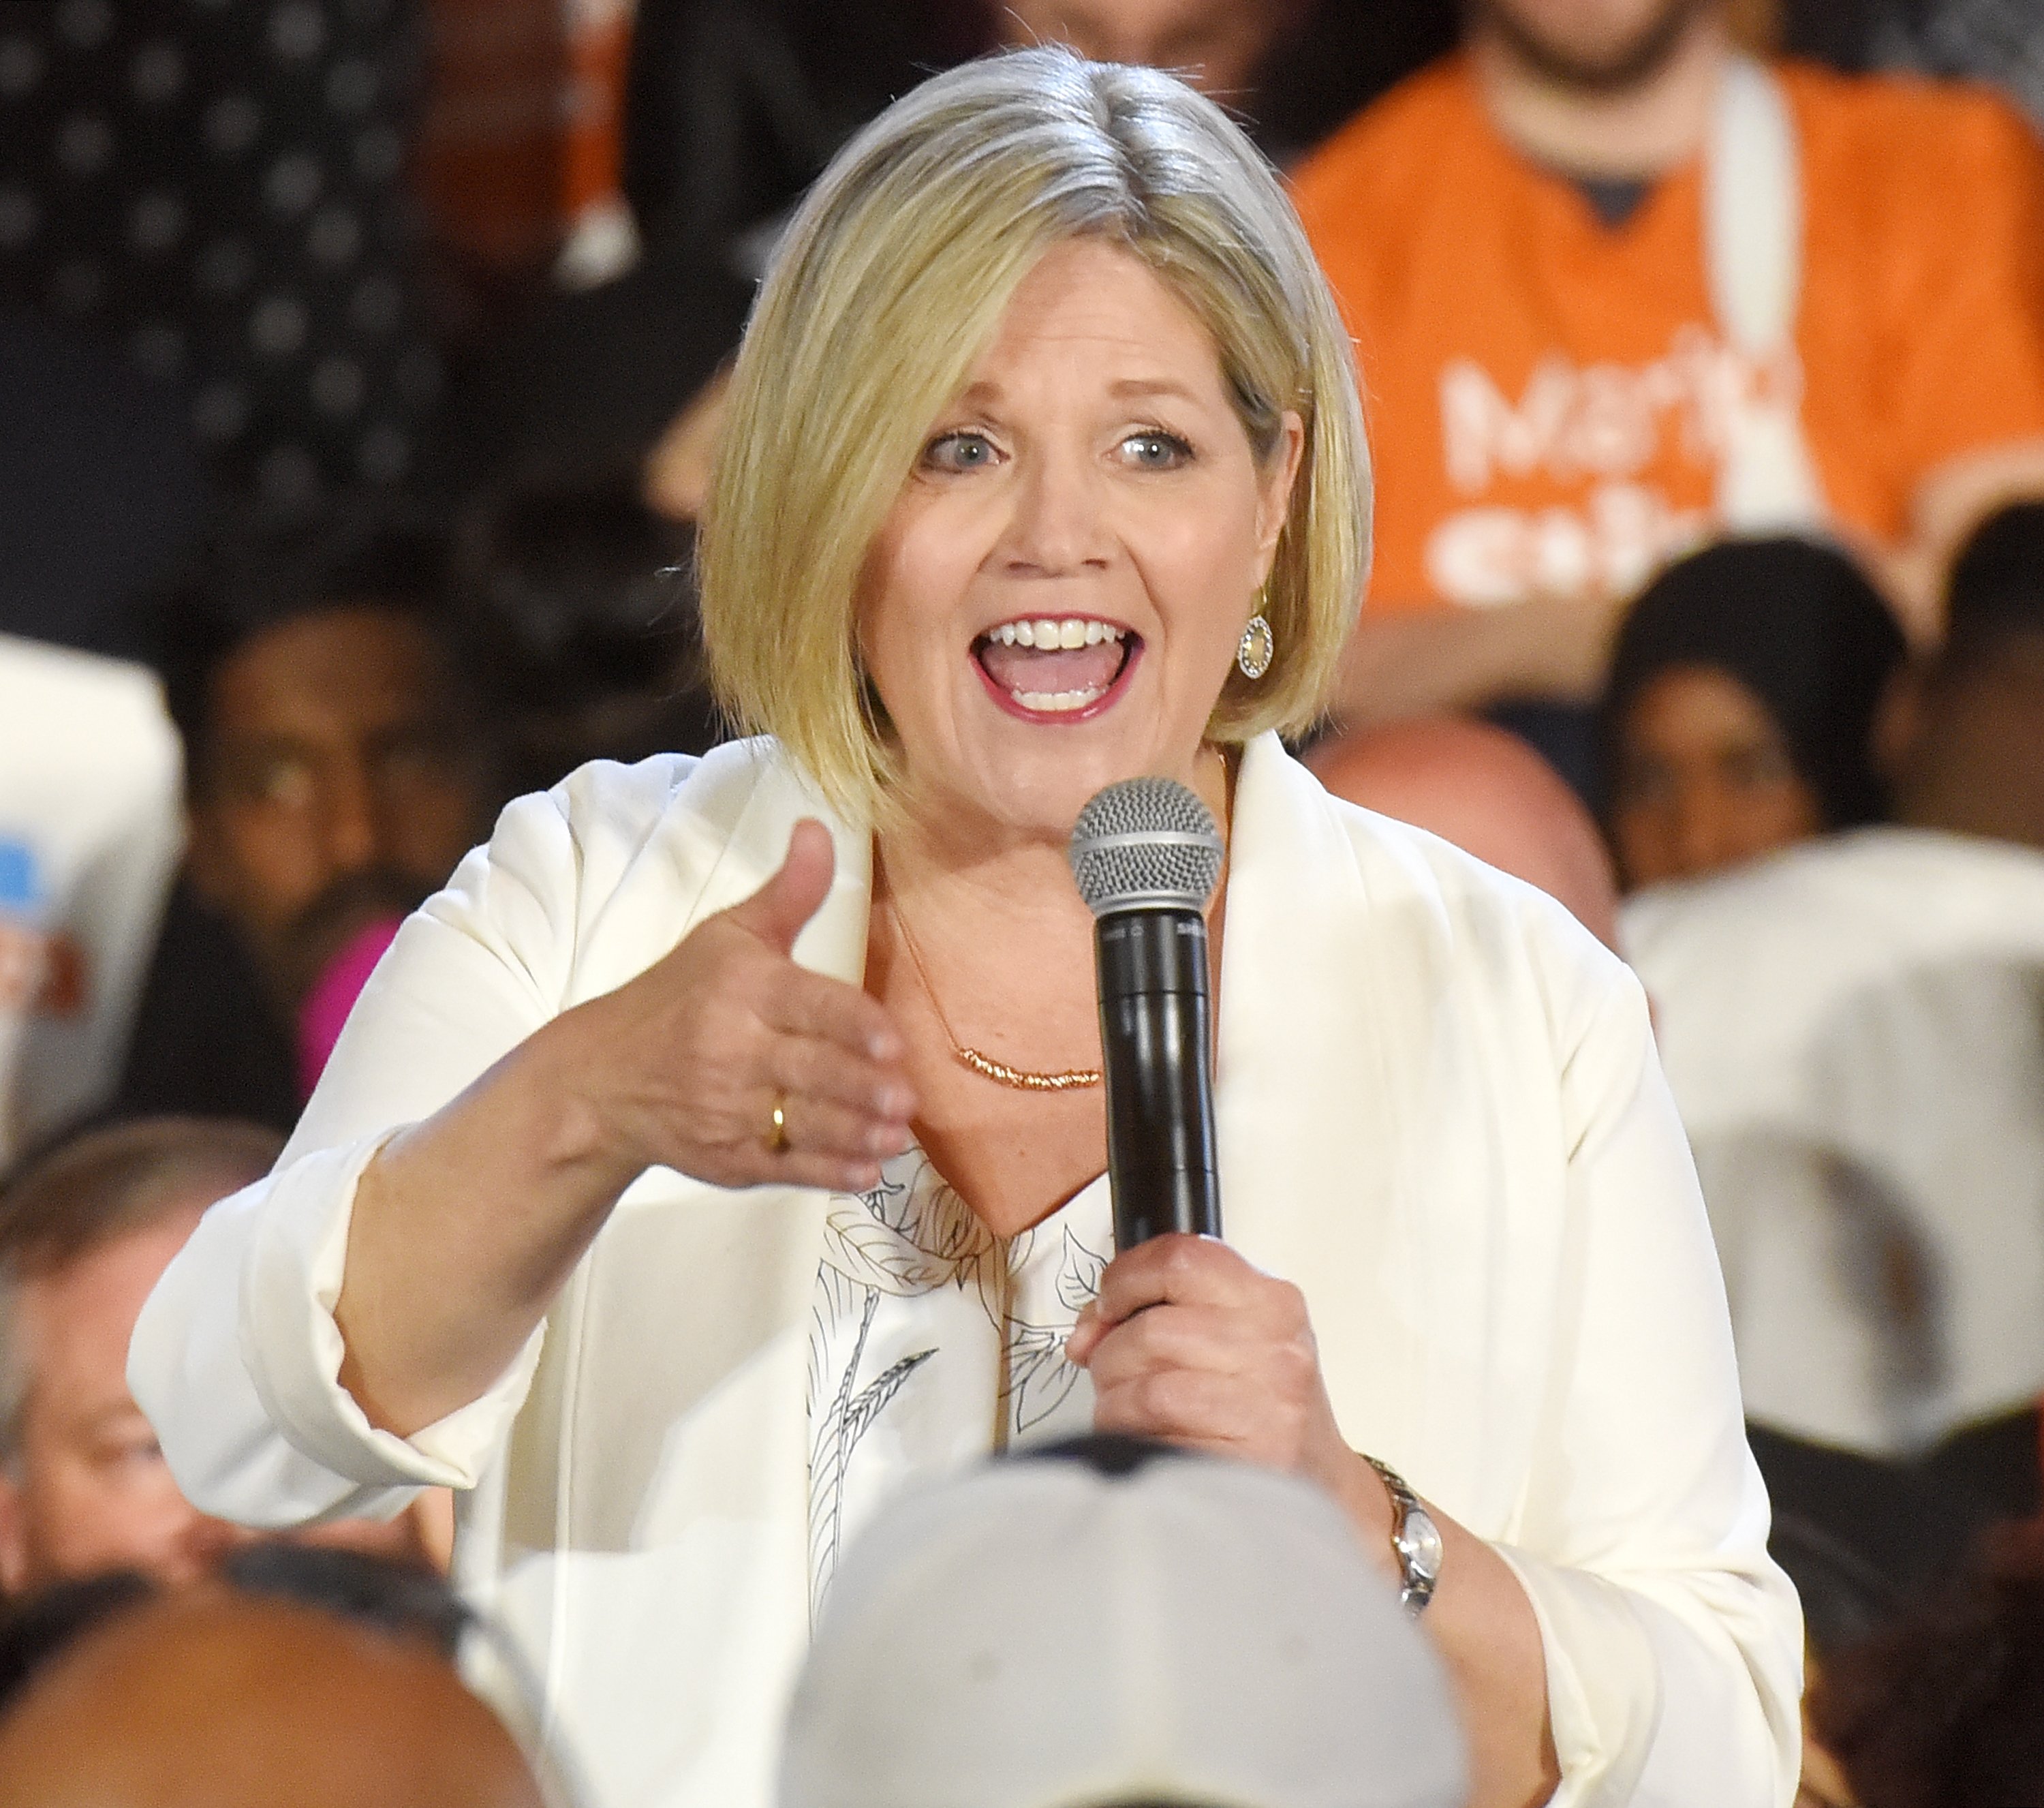 Ontario NDP finds 'sweet spot' on political spectrum, poll shows